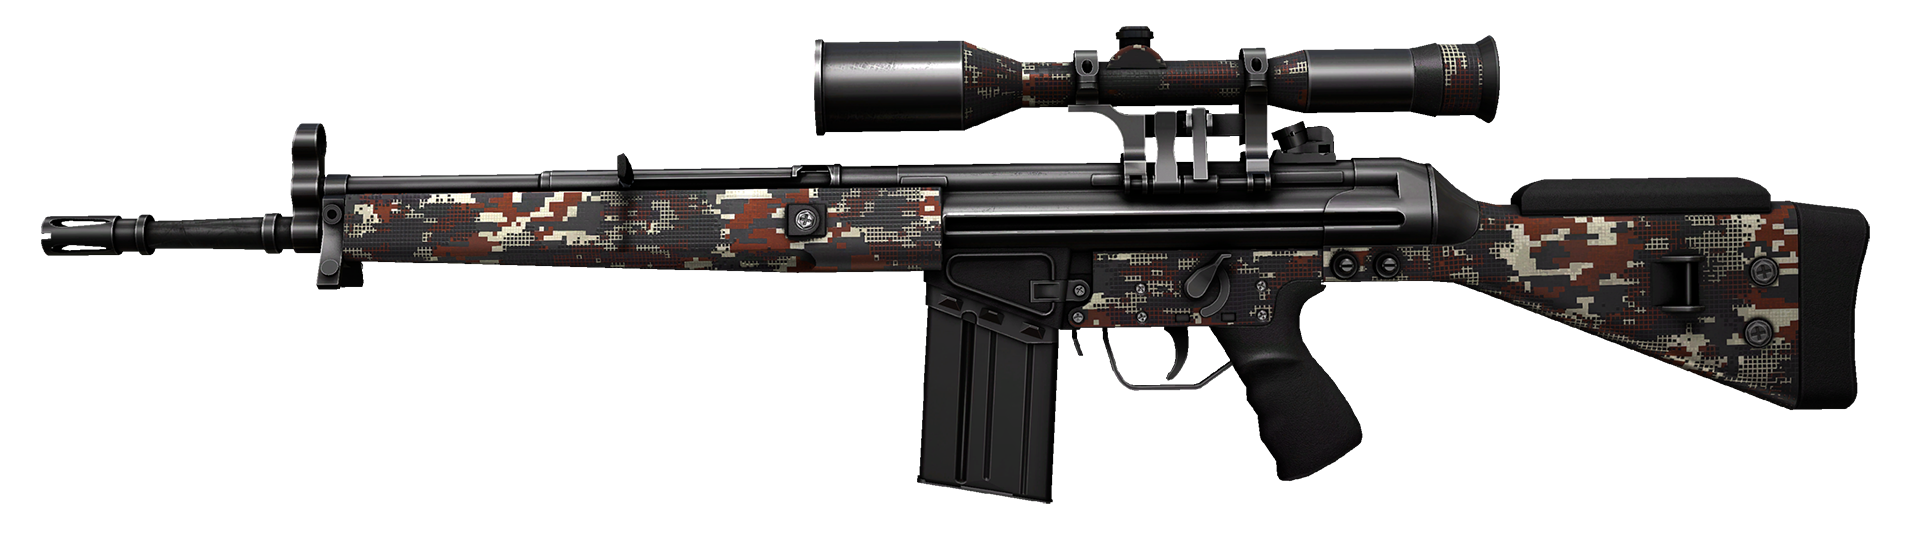 G3SG1 Contractor cs go skin for windows download